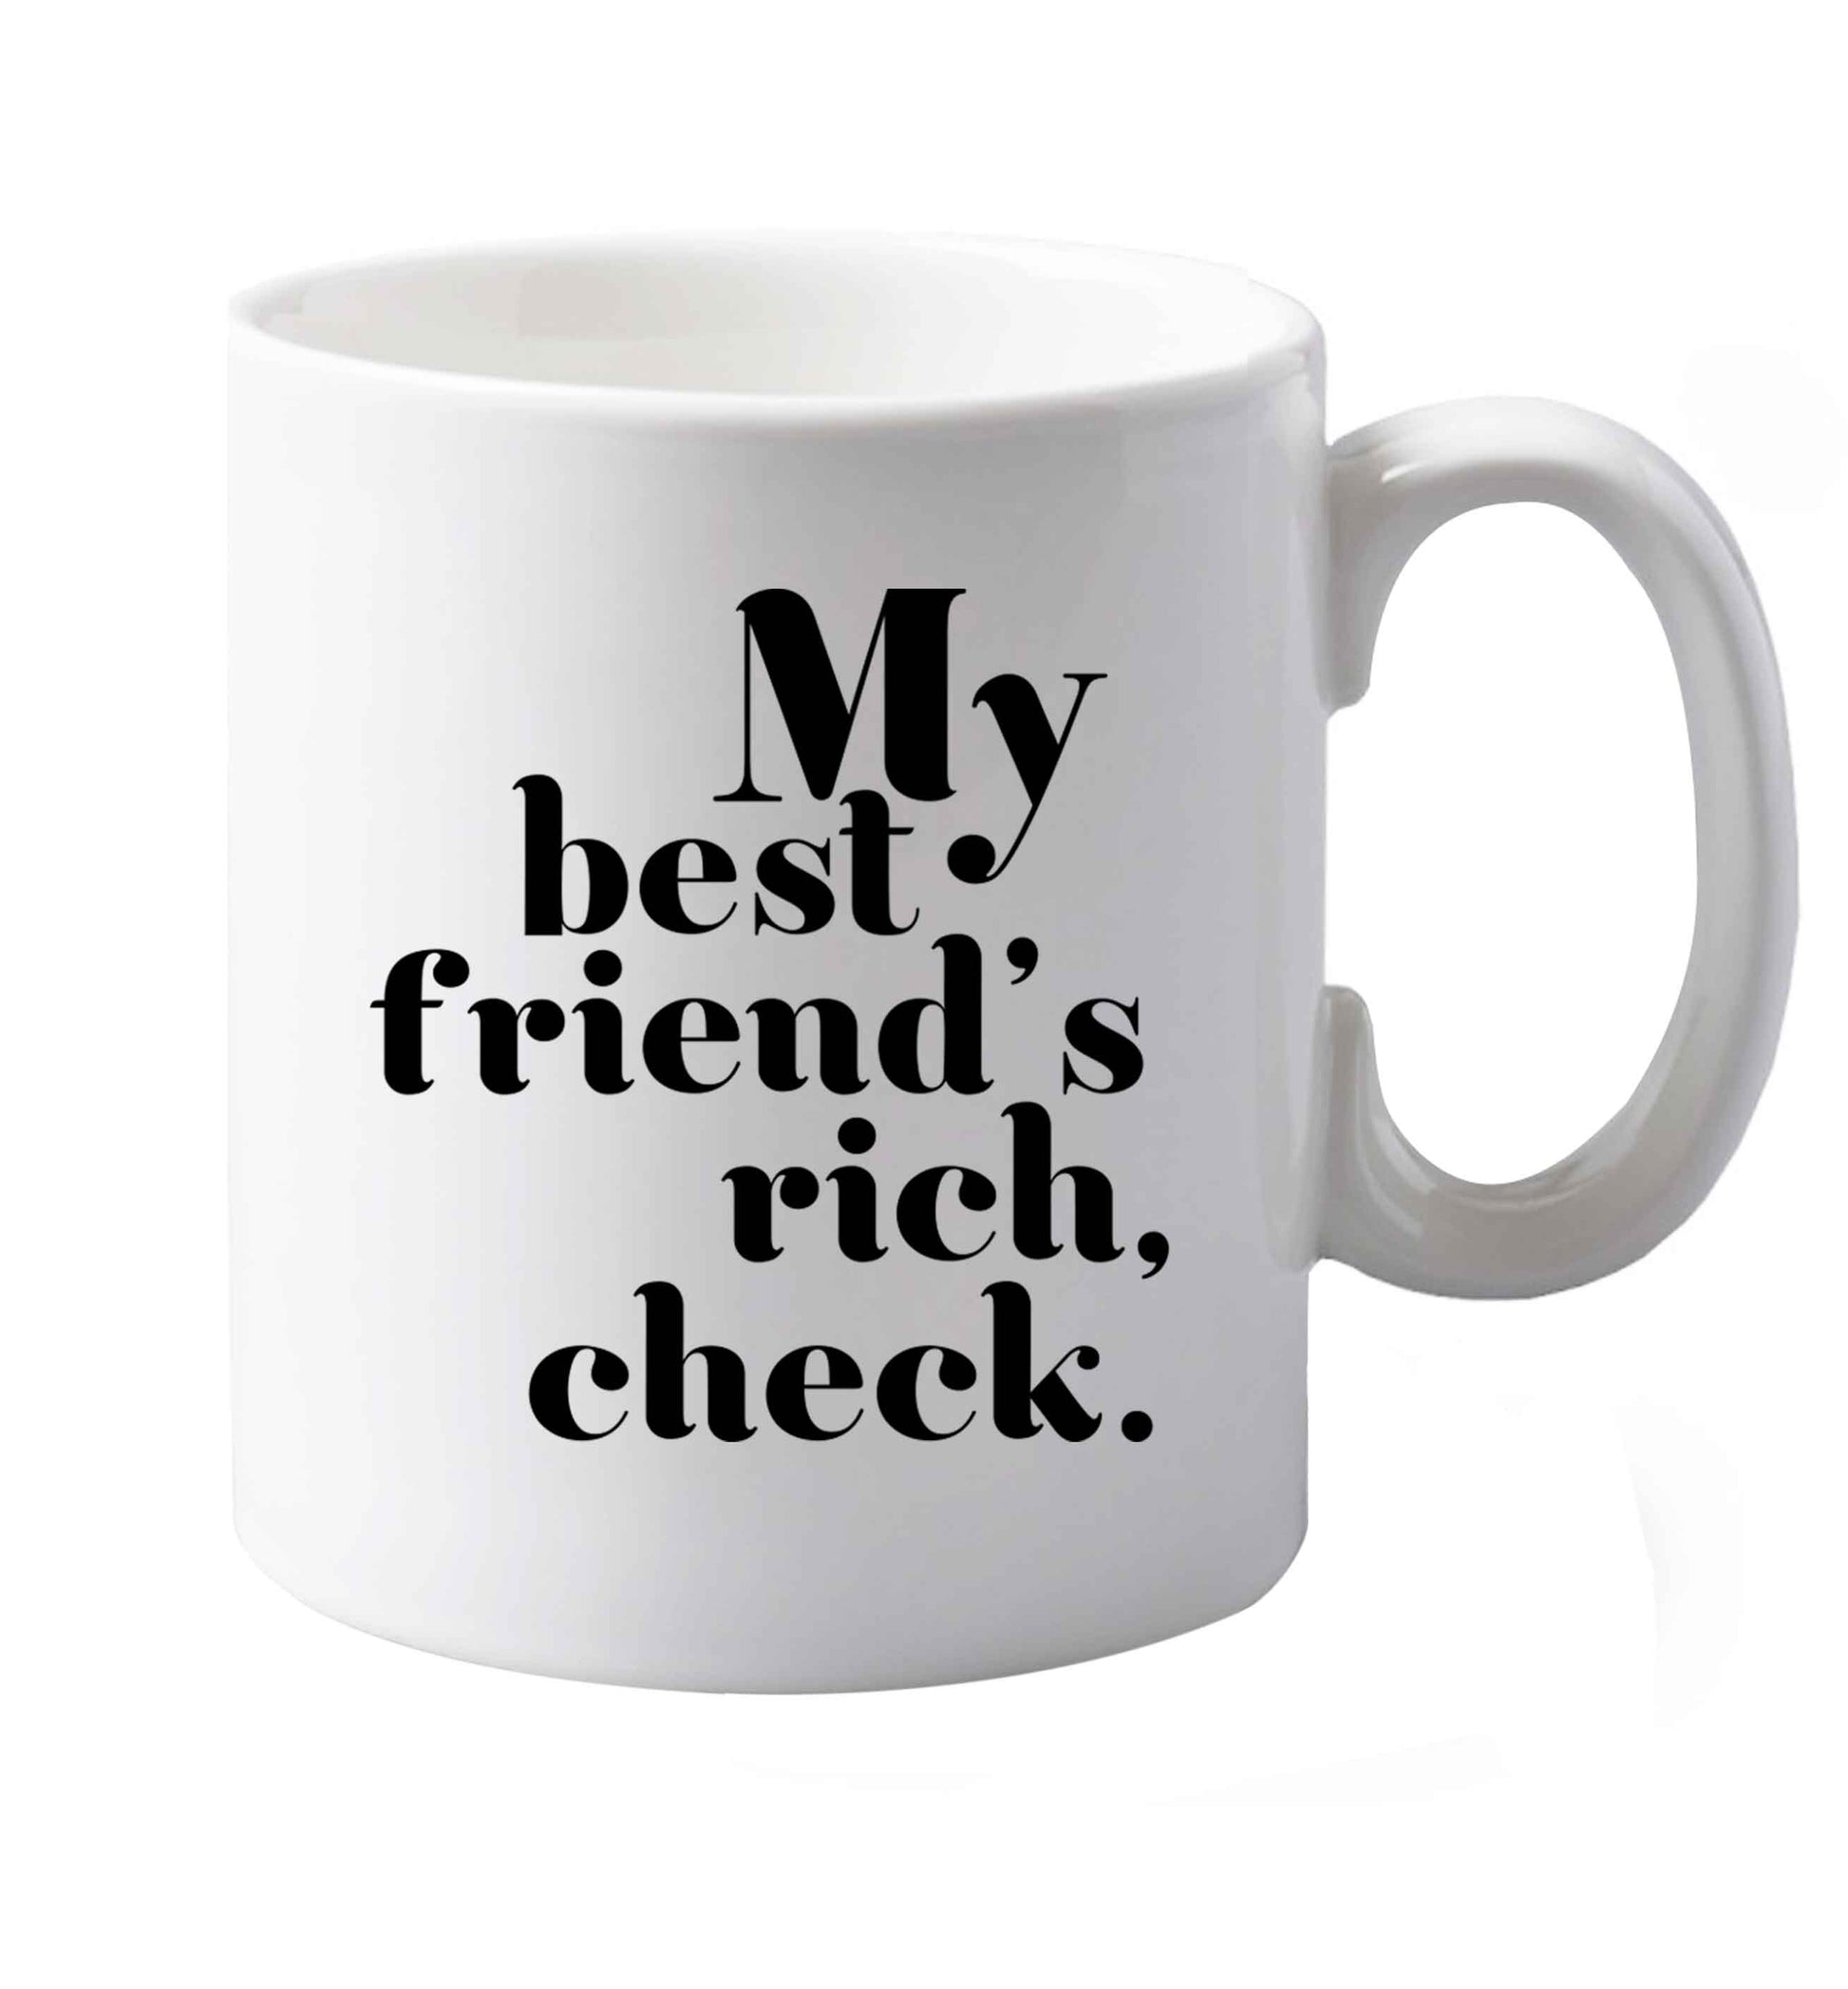 10 oz Got a rich best friend? Why not ask them to get you this, just let us  know and we'll tripple the price ;)    ceramic mug both sides